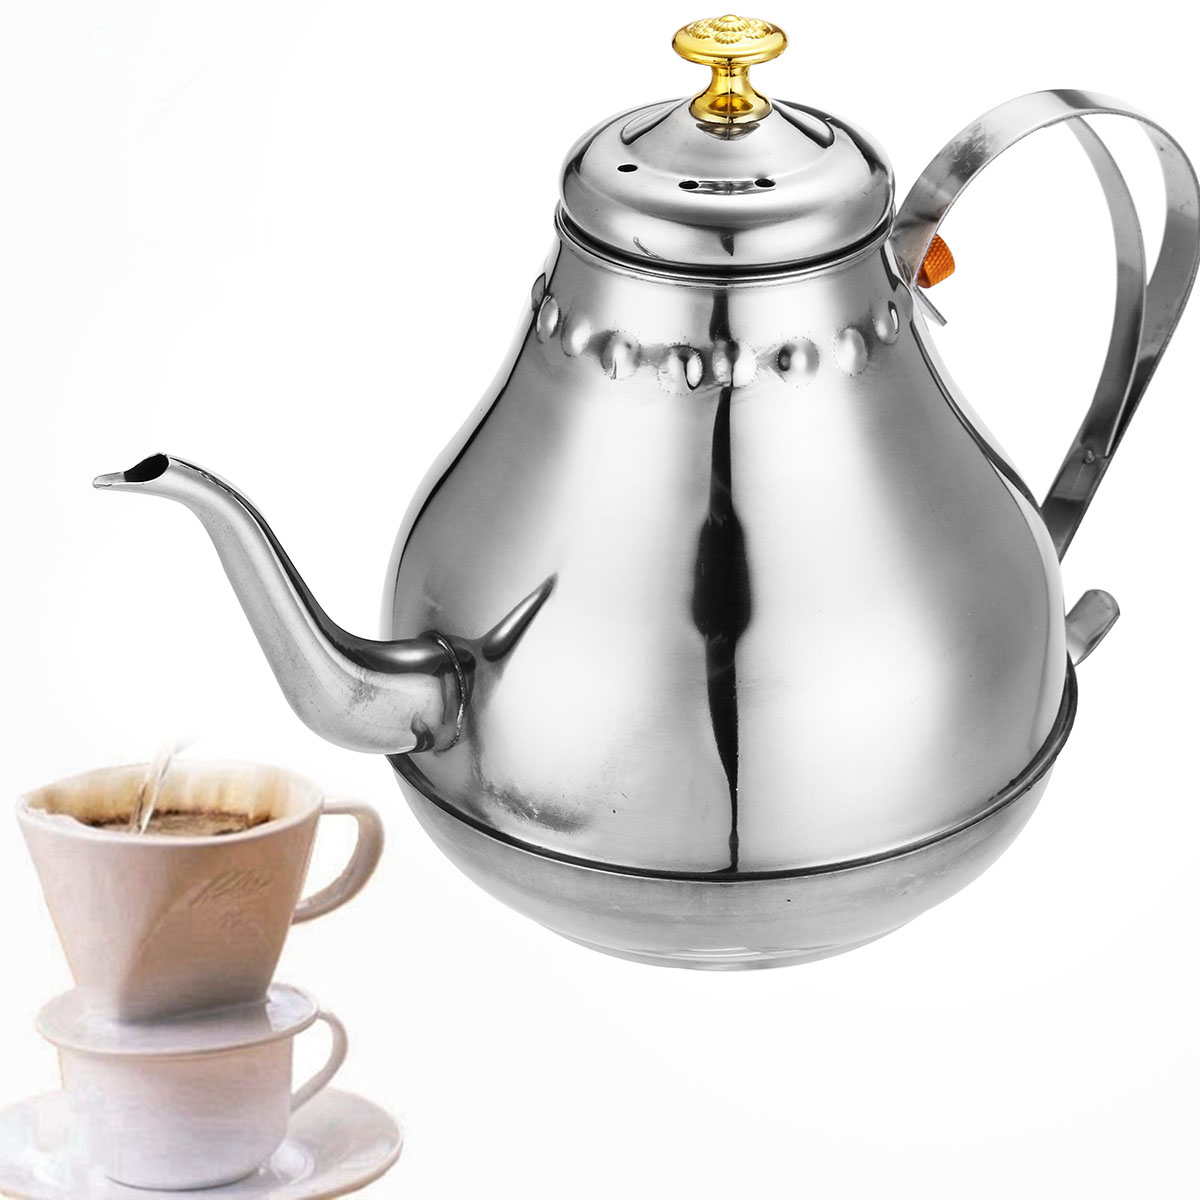 1218L-Stainless-Steel-Coffee-Drip-Kettle-Pot-for-Coffee-Tea-with-Filter-Net-1342379